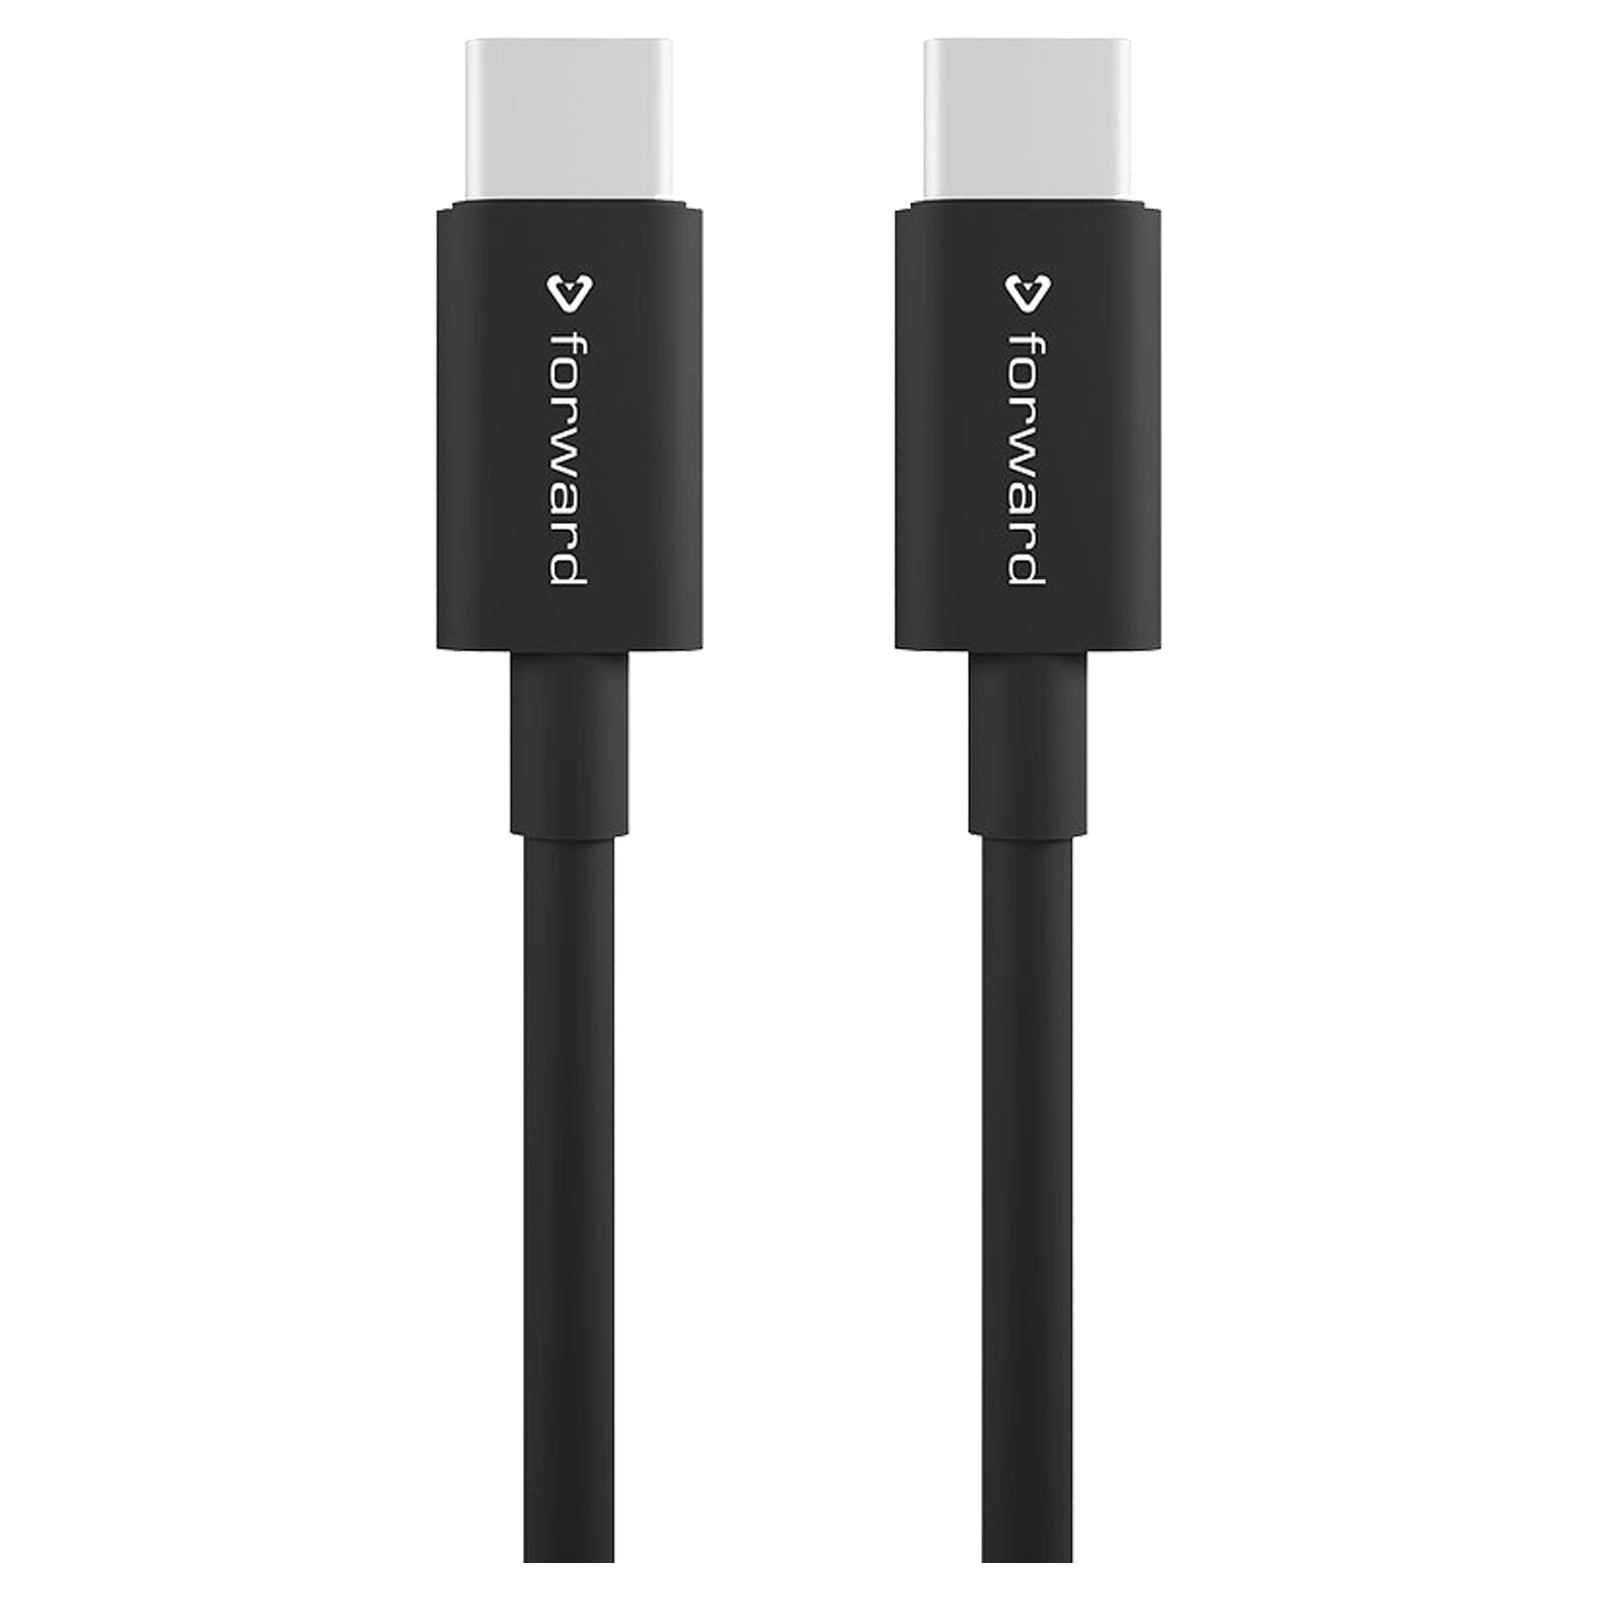 Forward TPE 1 Meter USB 2.0 (Type-C) to USB 2.0 (Type-C) Power/Charging, Data Transfer USB Cable (480 Mbps Data Transfer Rate, FCTT-09, Black)_1